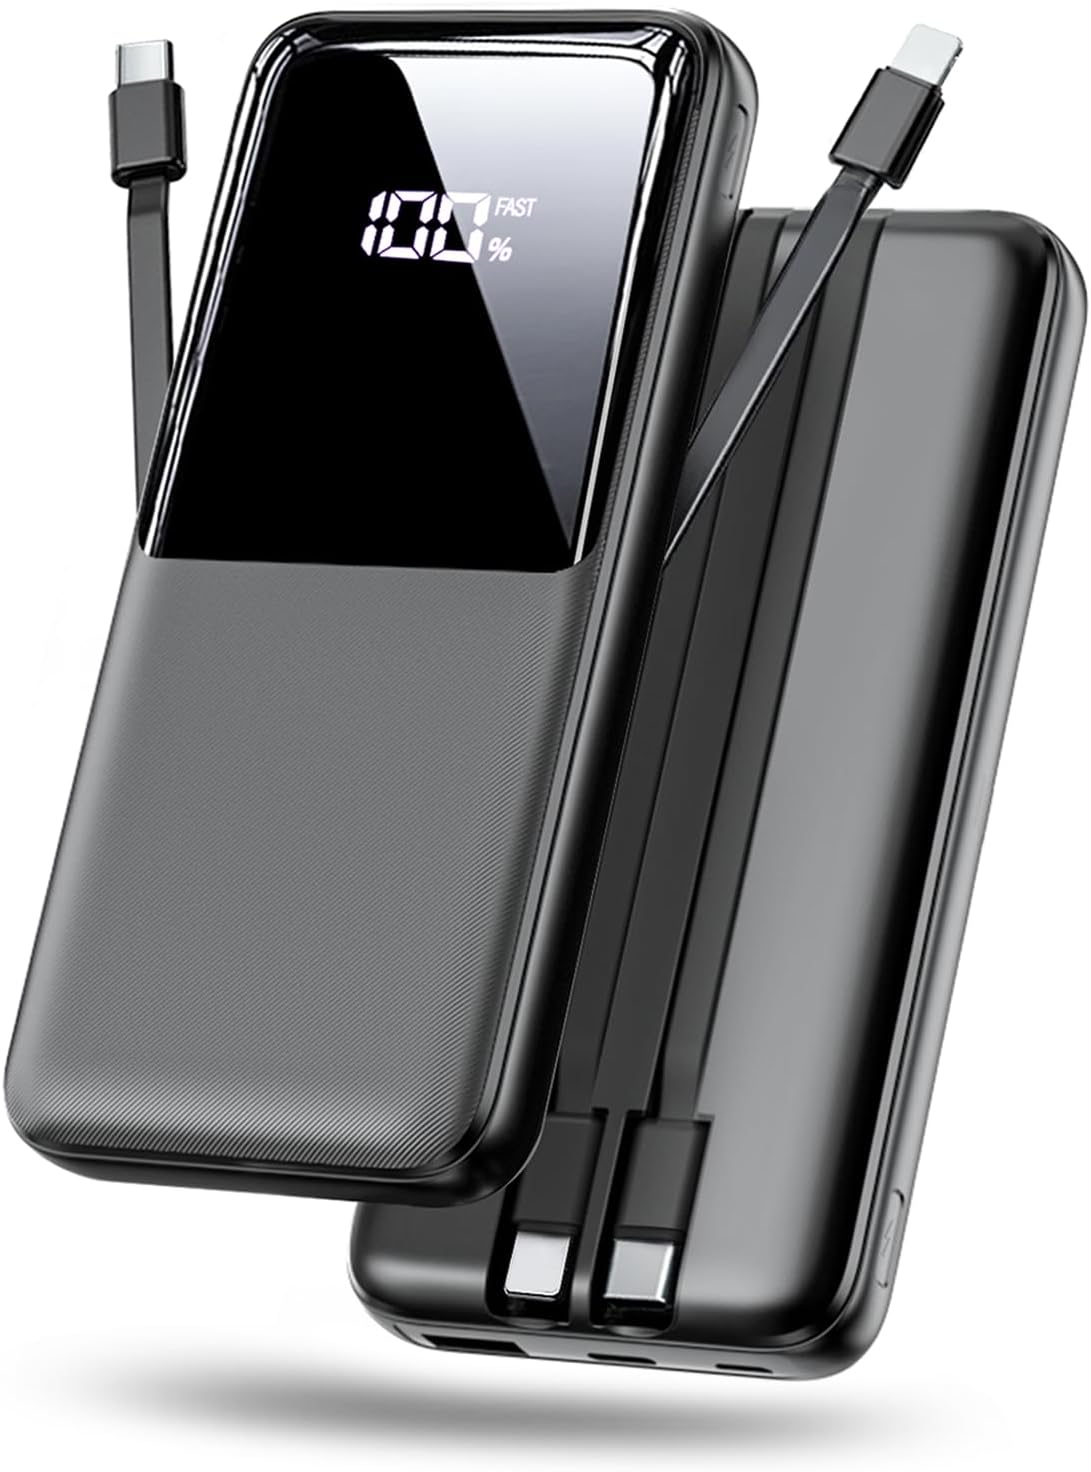 Portable Charger Power Bank-The Best Gifts For Travelers